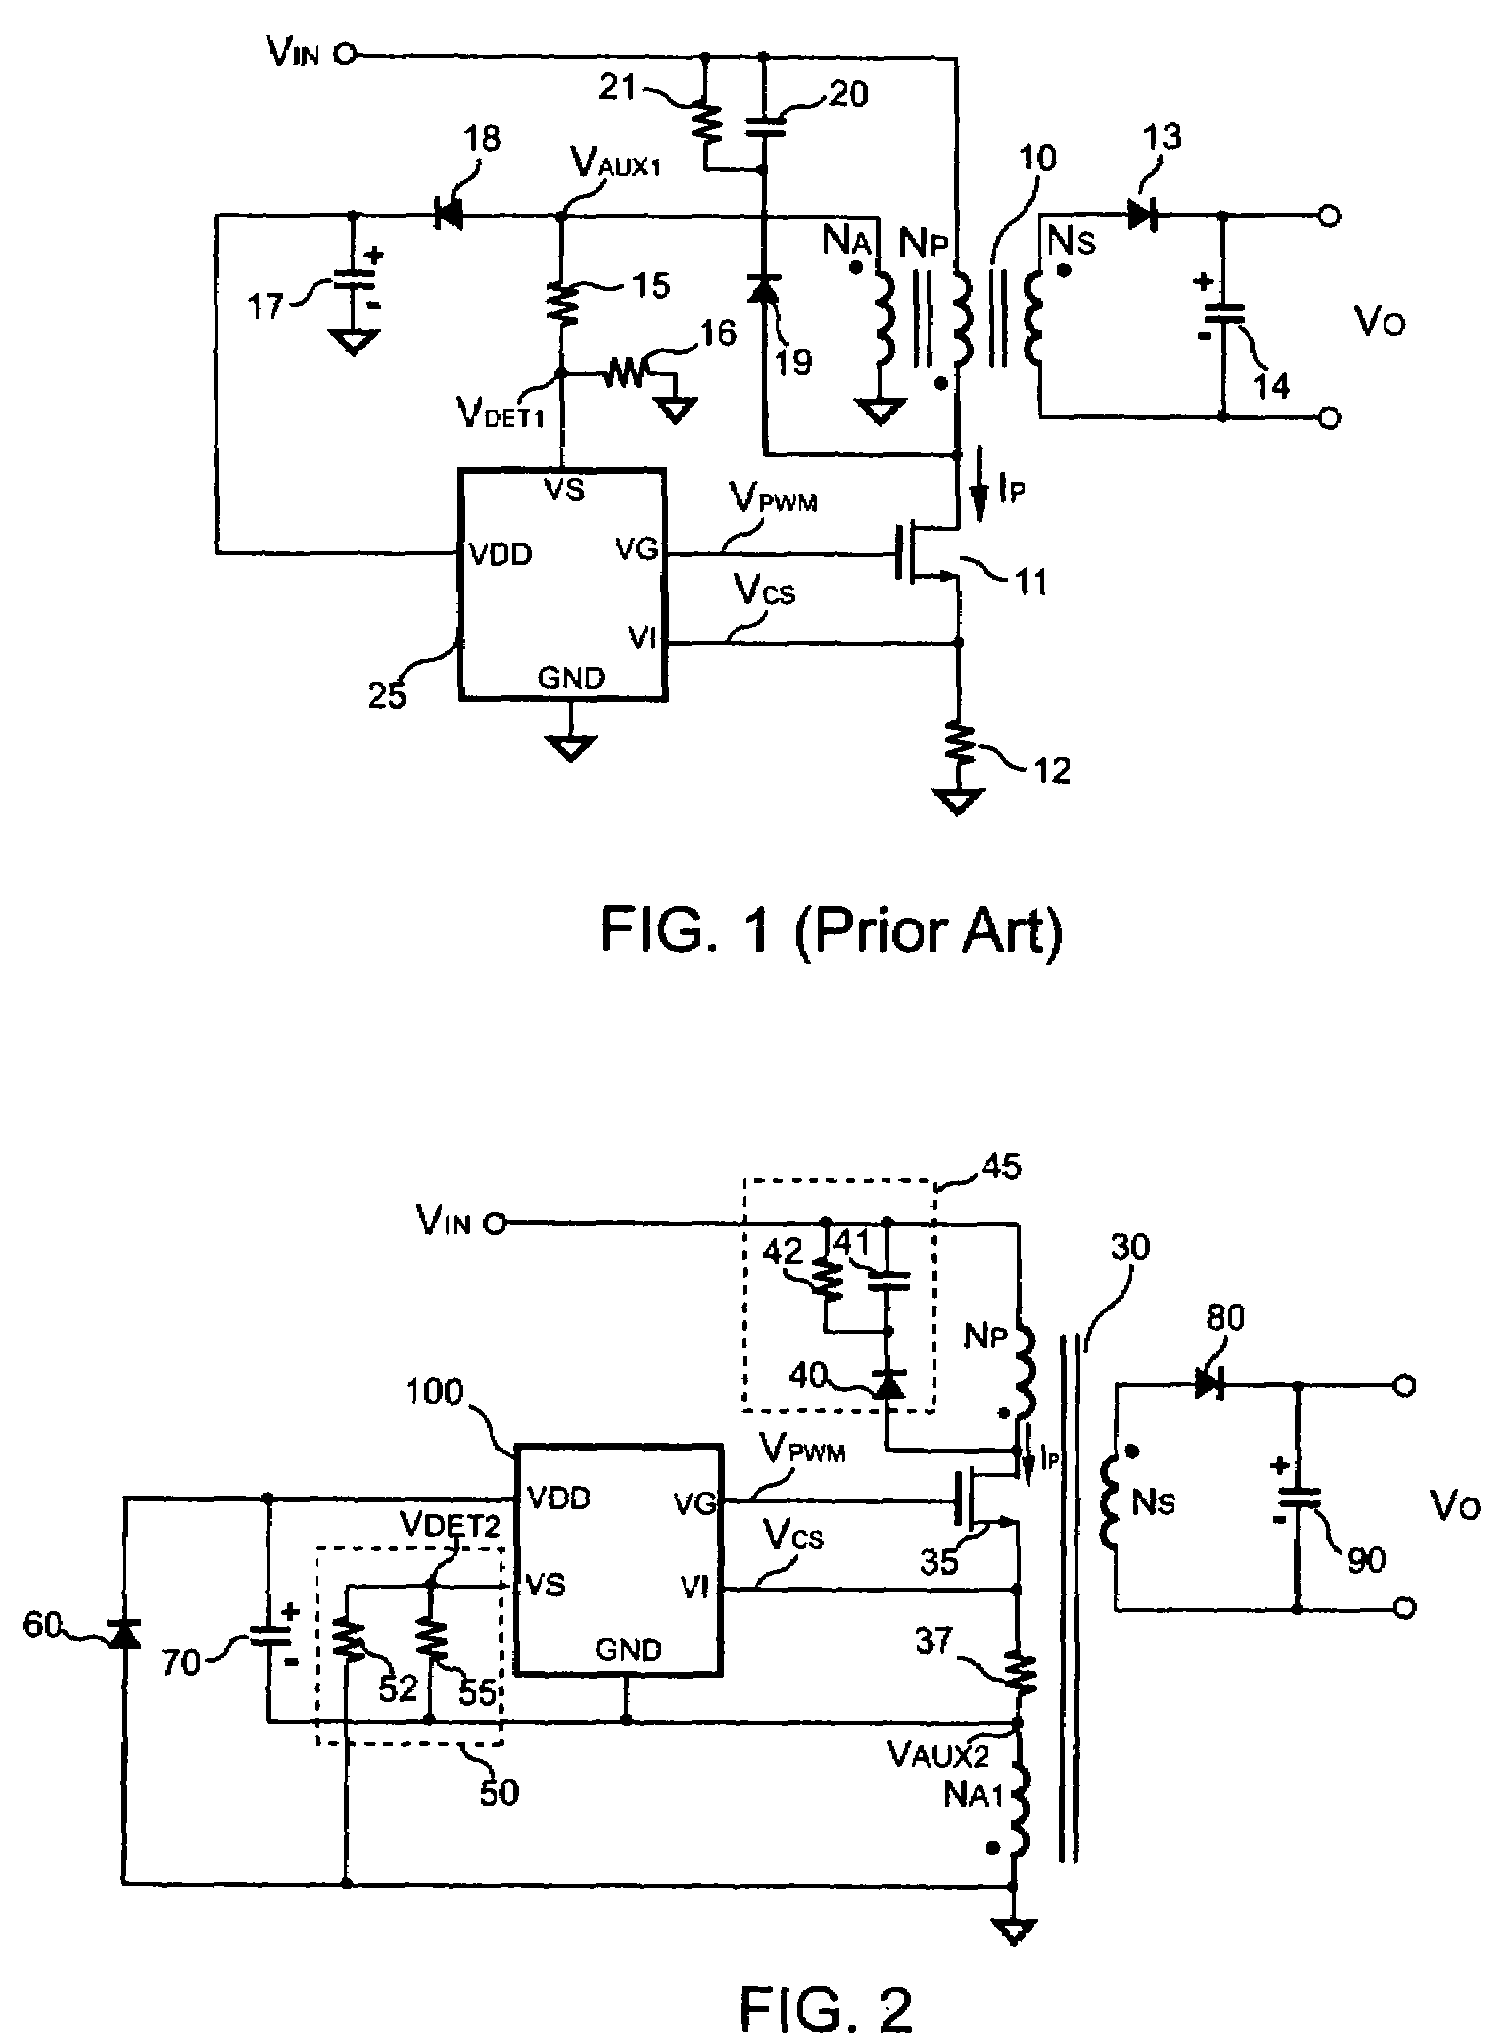 Primary side controlled switching regulator